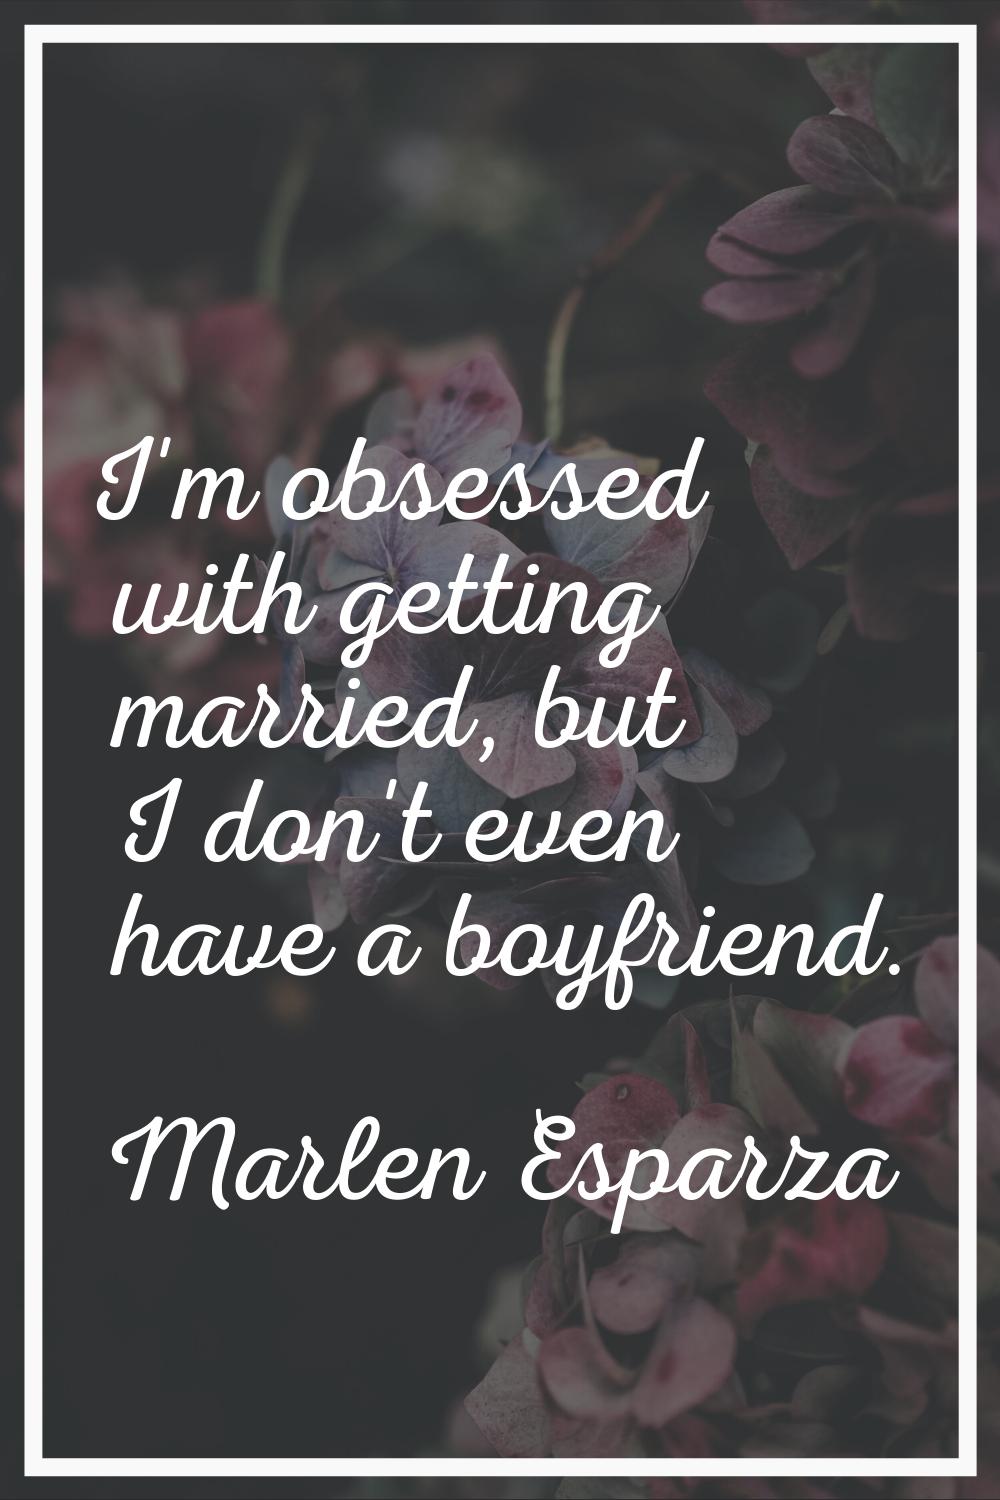 I'm obsessed with getting married, but I don't even have a boyfriend.